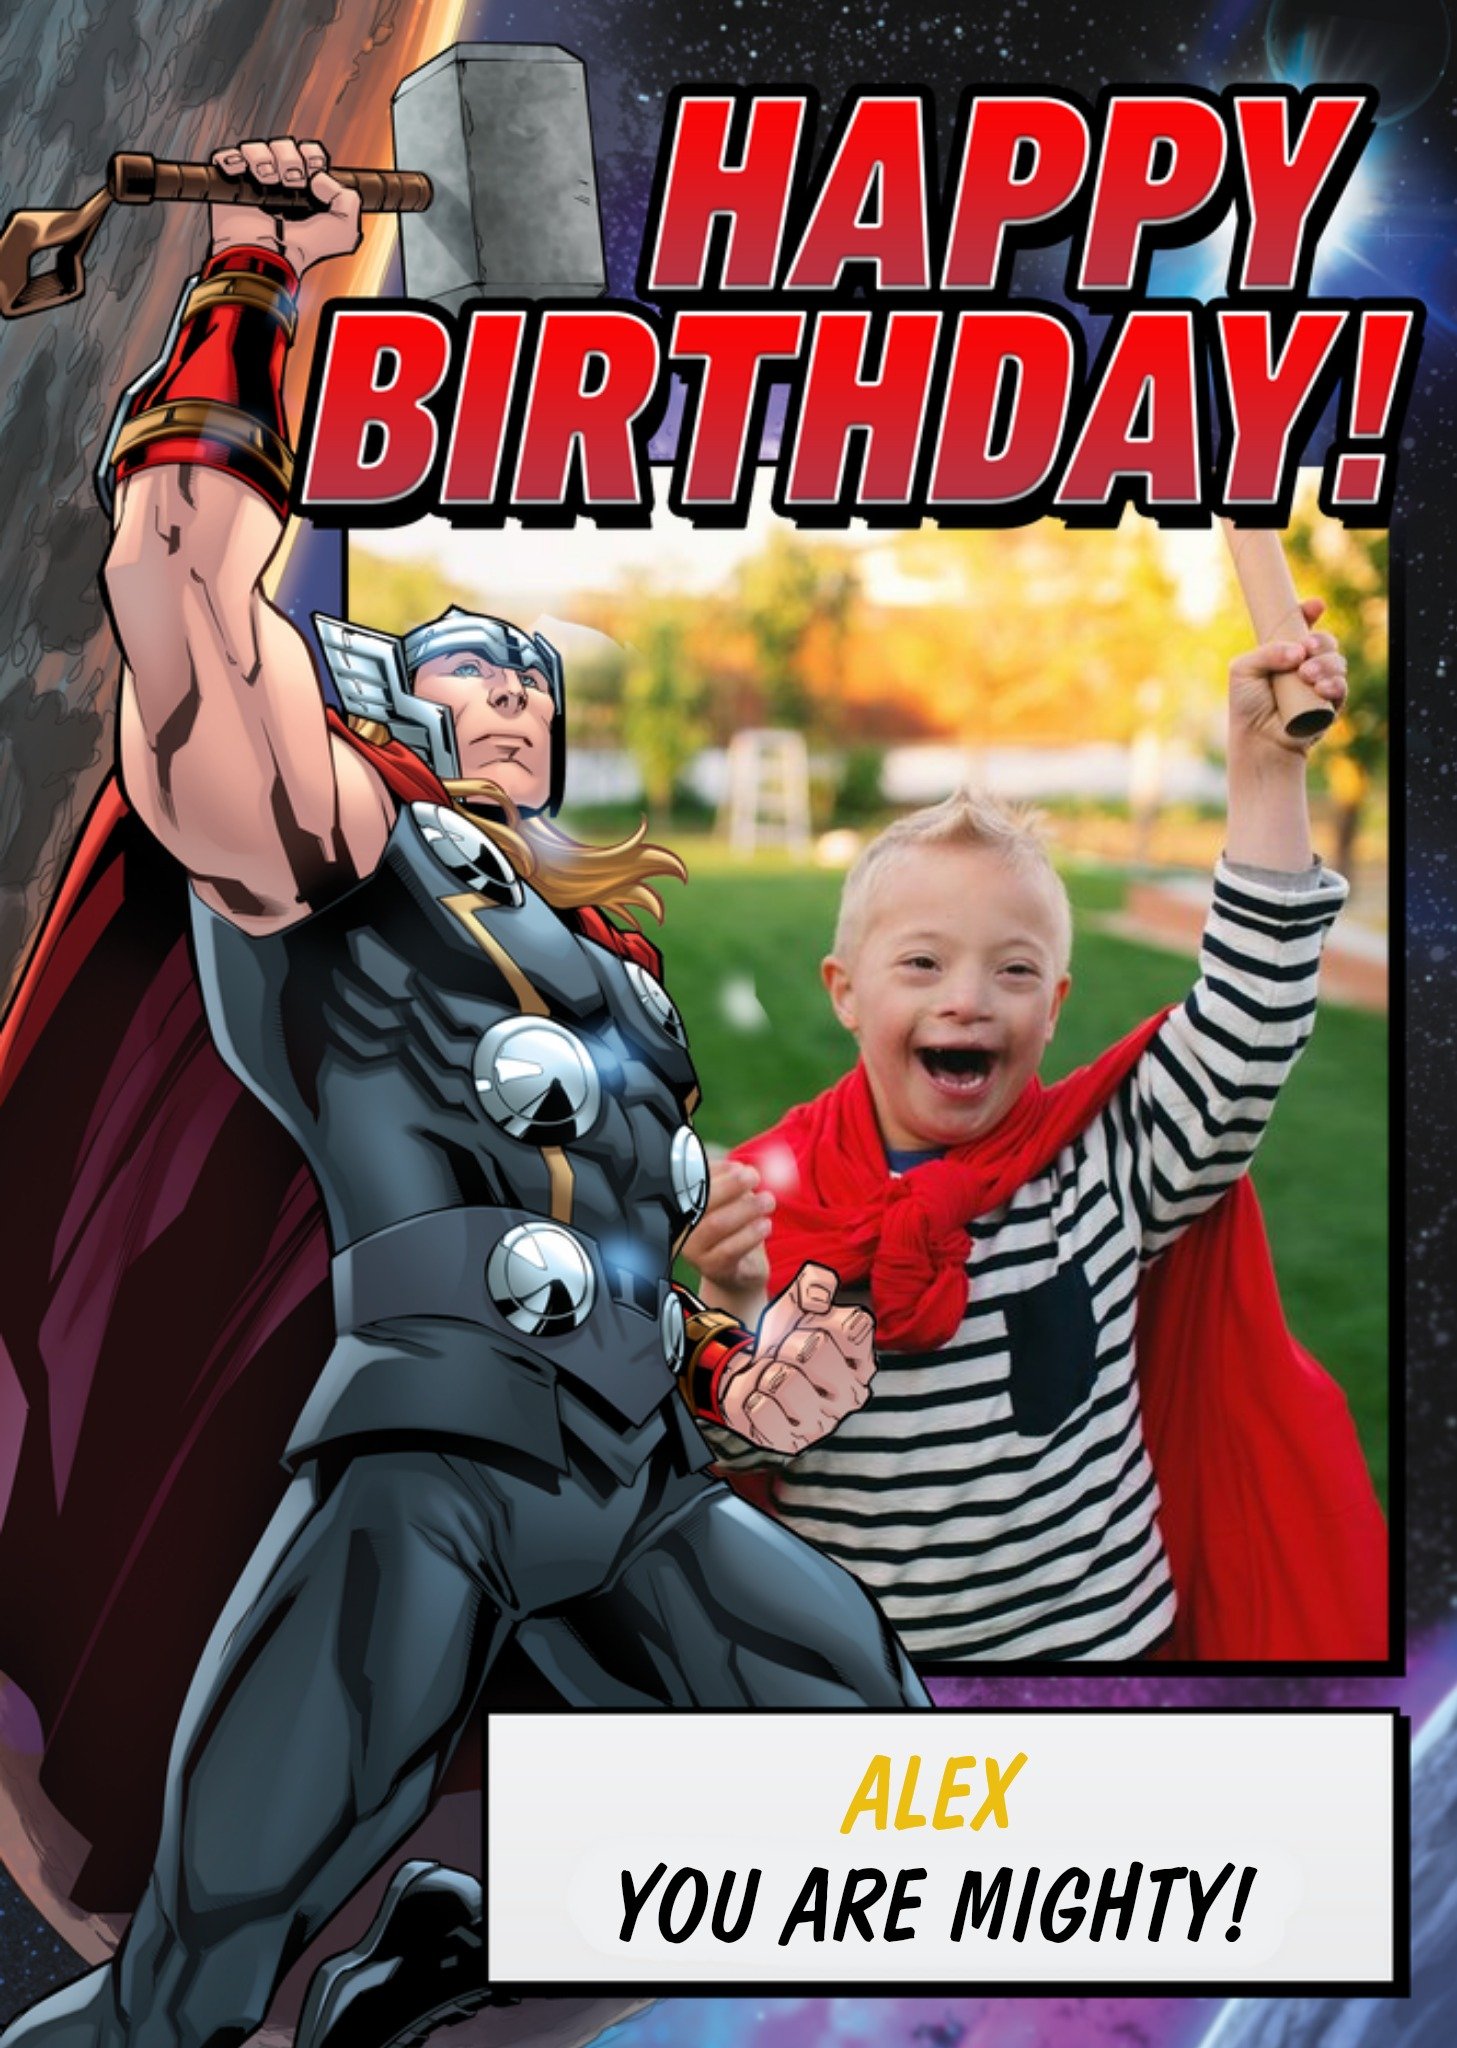 Marvel Thor You Are Mighty Avengers Birthday Photo Upload Card, Large